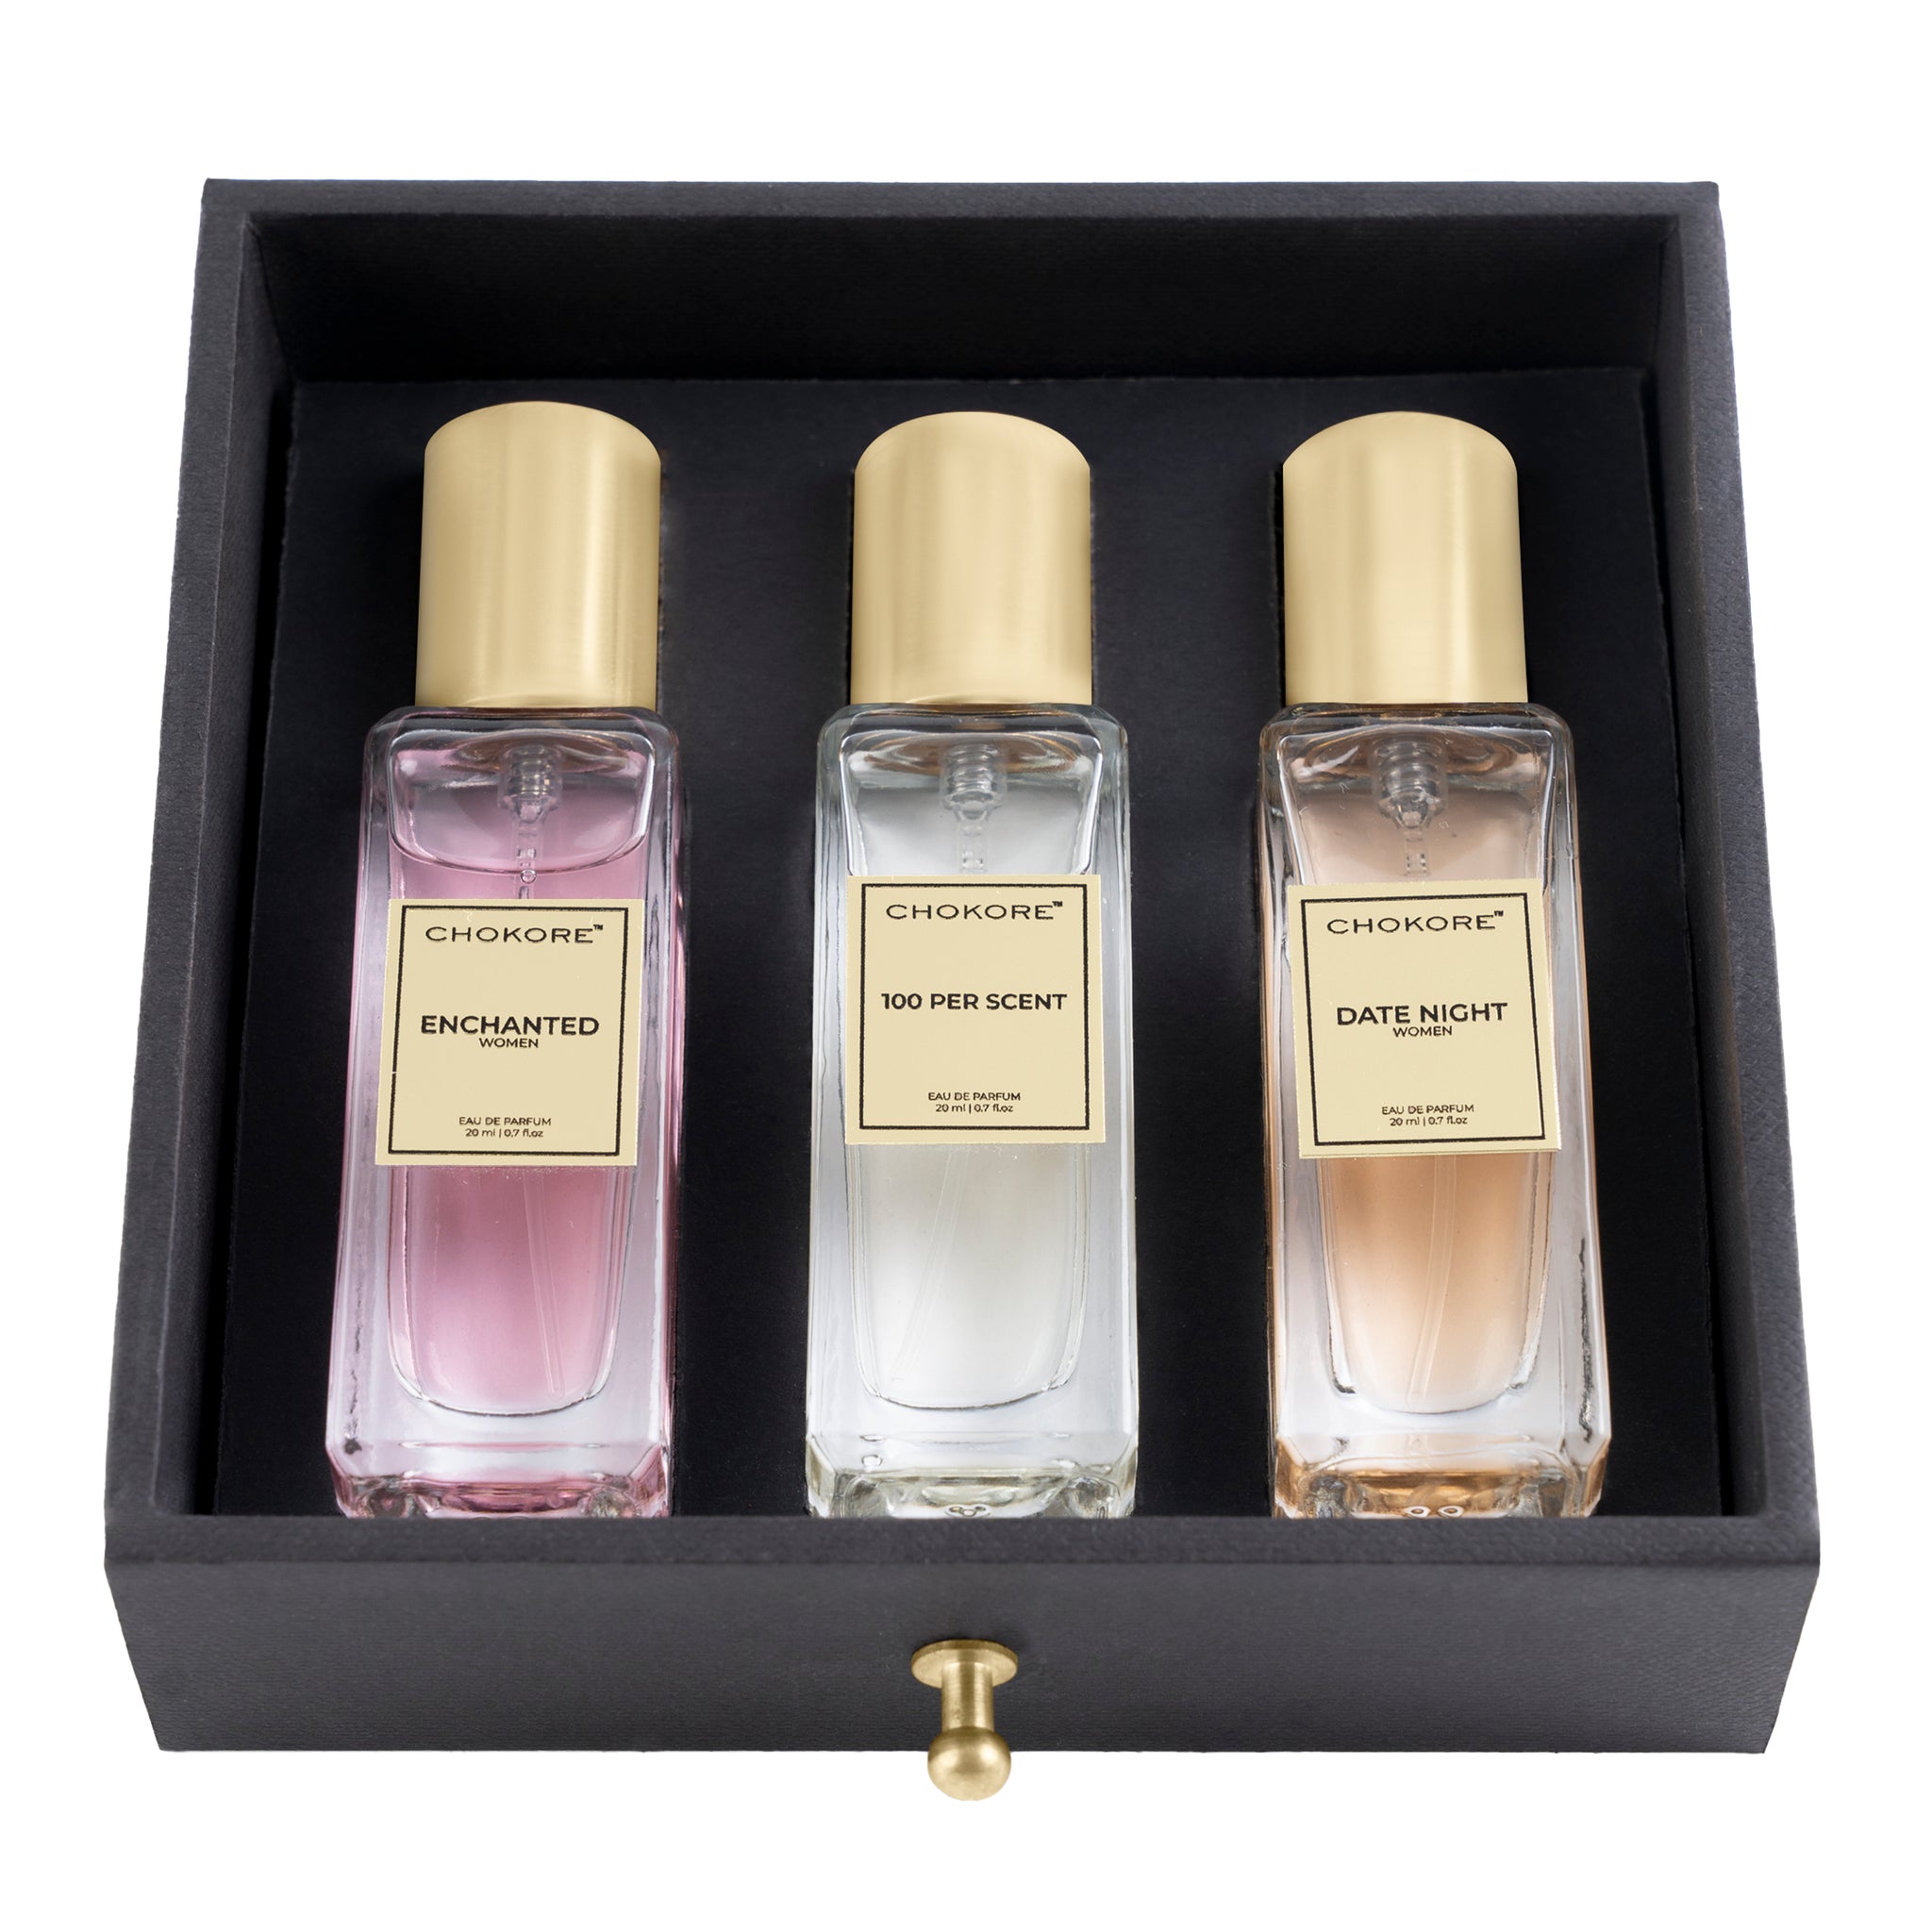 Chokore Perfume Combo Pack of 3 Only For Women (100 Per Scent, Date Night, & Enchanted) | 3 x 20 ml